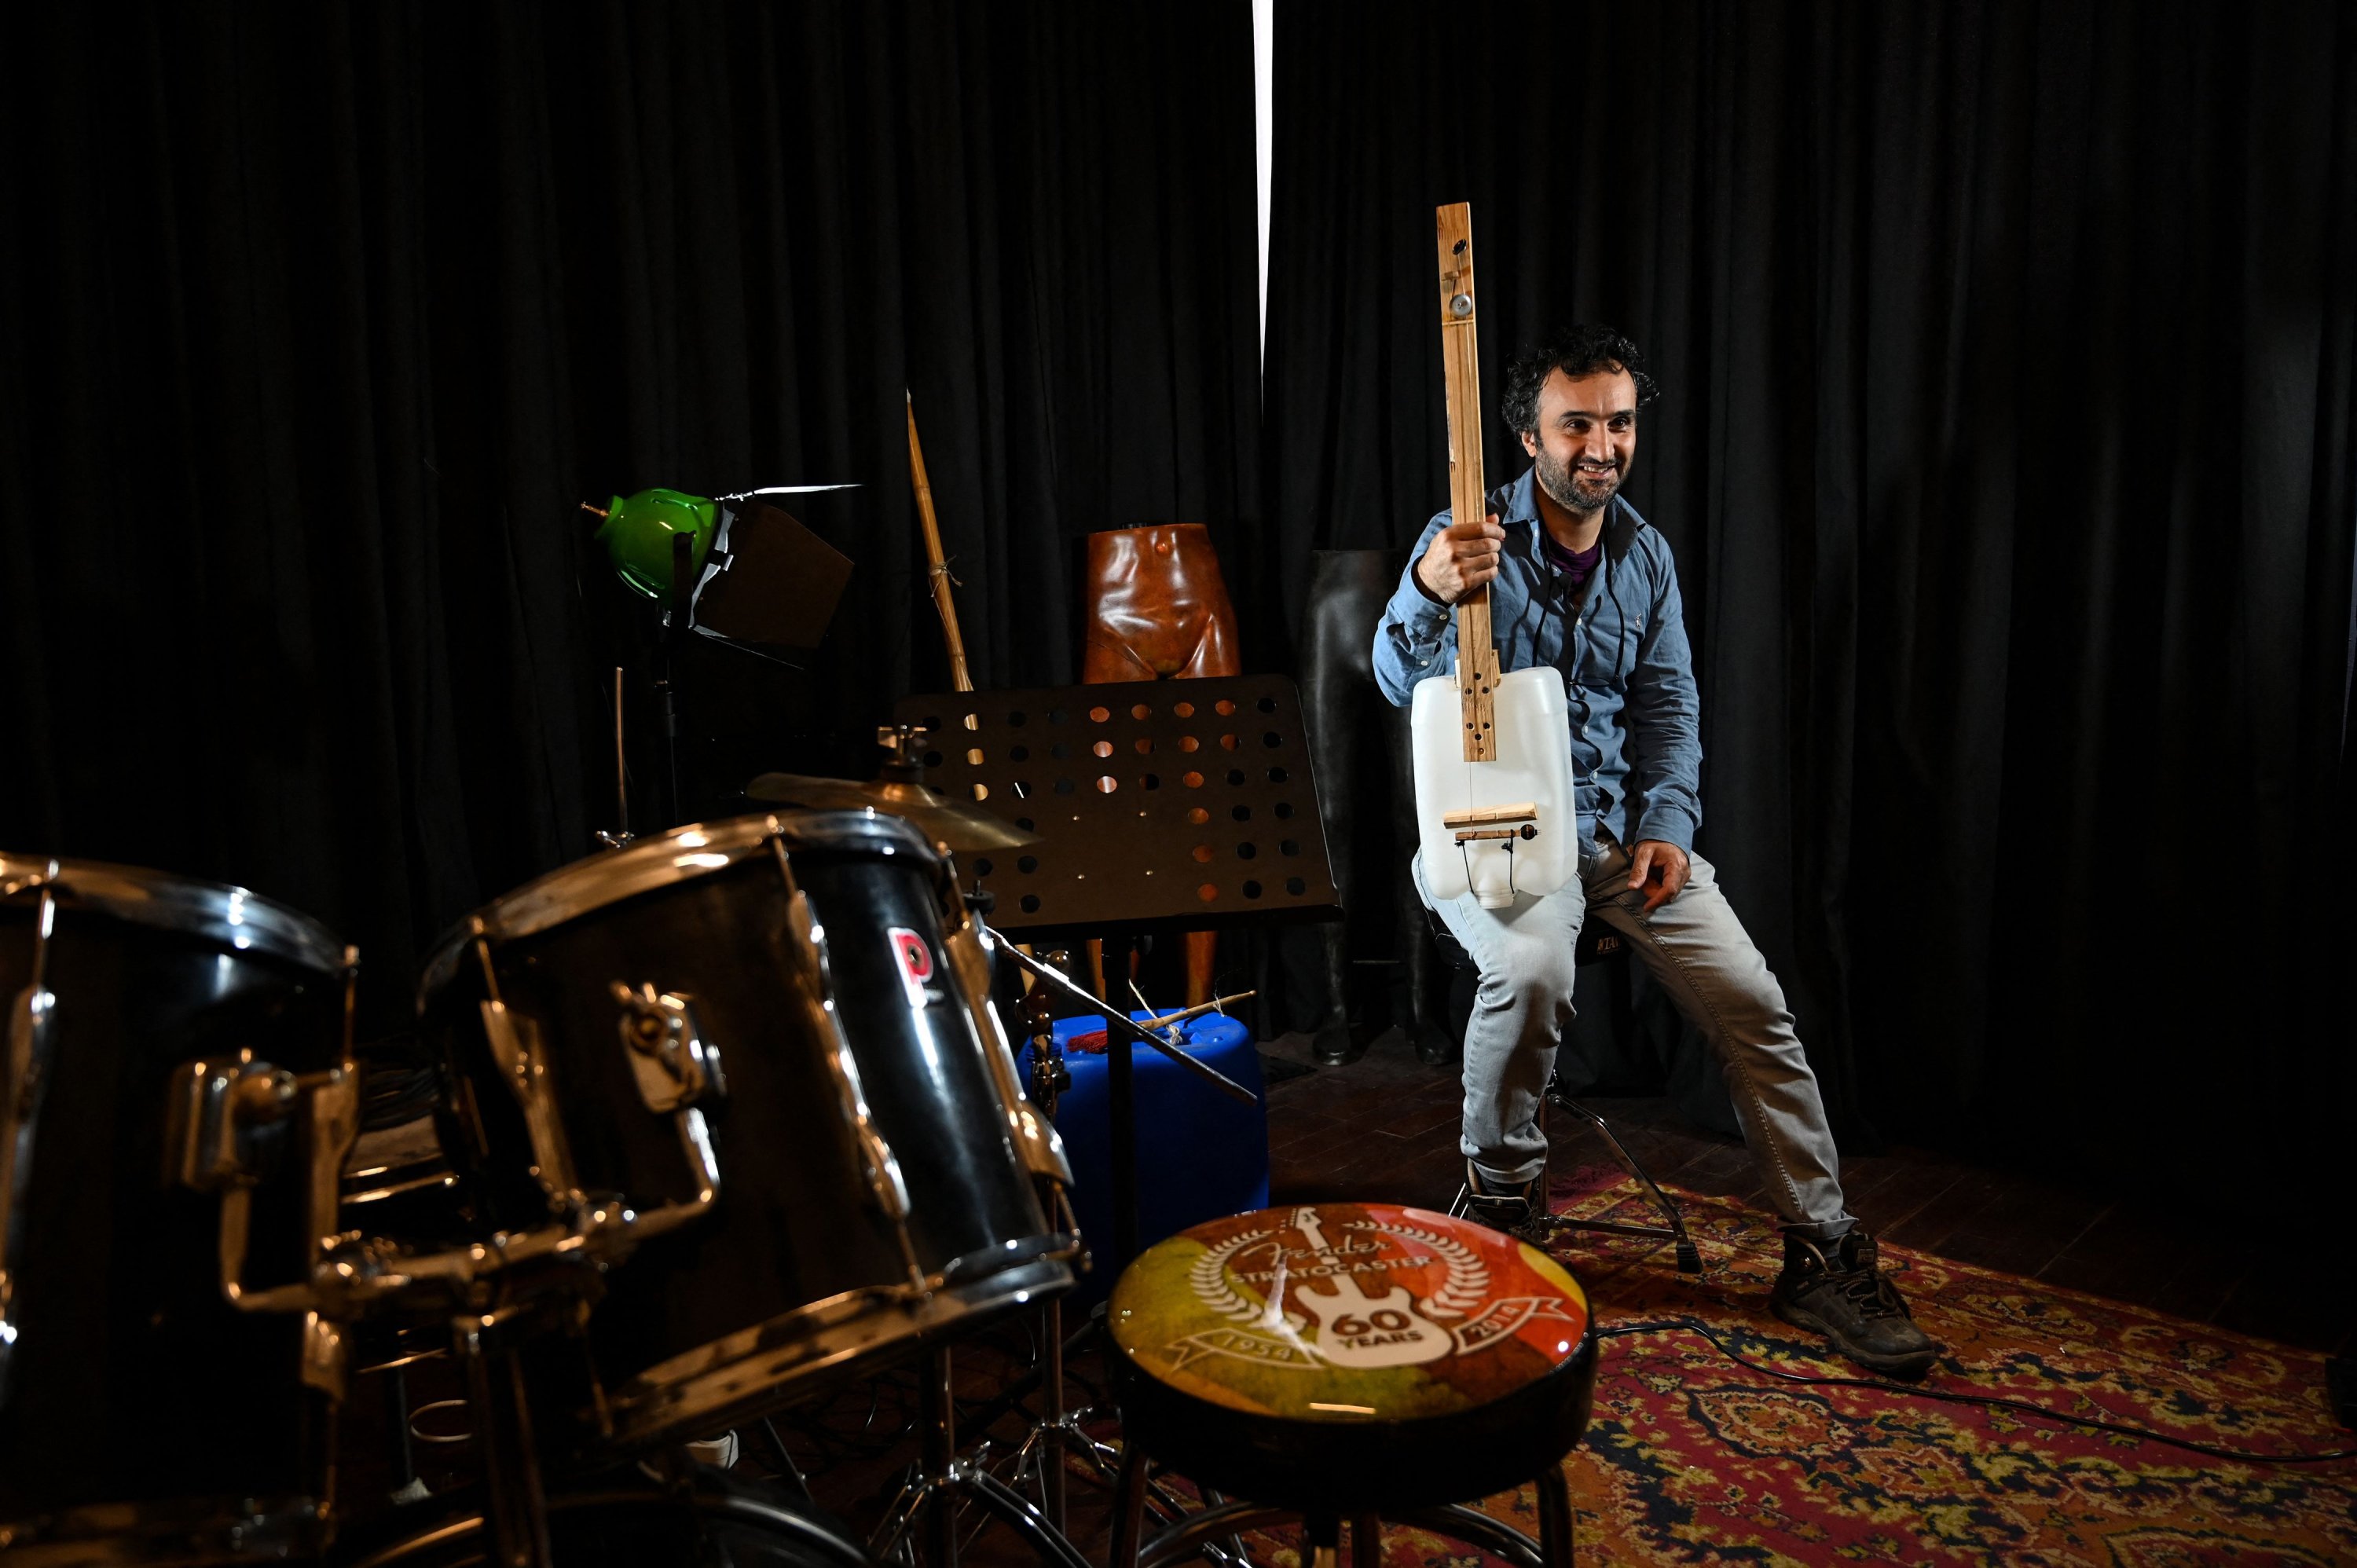 Fungistanbul band member Roni Aran poses as he prepares to play with one of his trash-made instruments in Istanbul, Turkey, November 8, 2021 (AFP photo)